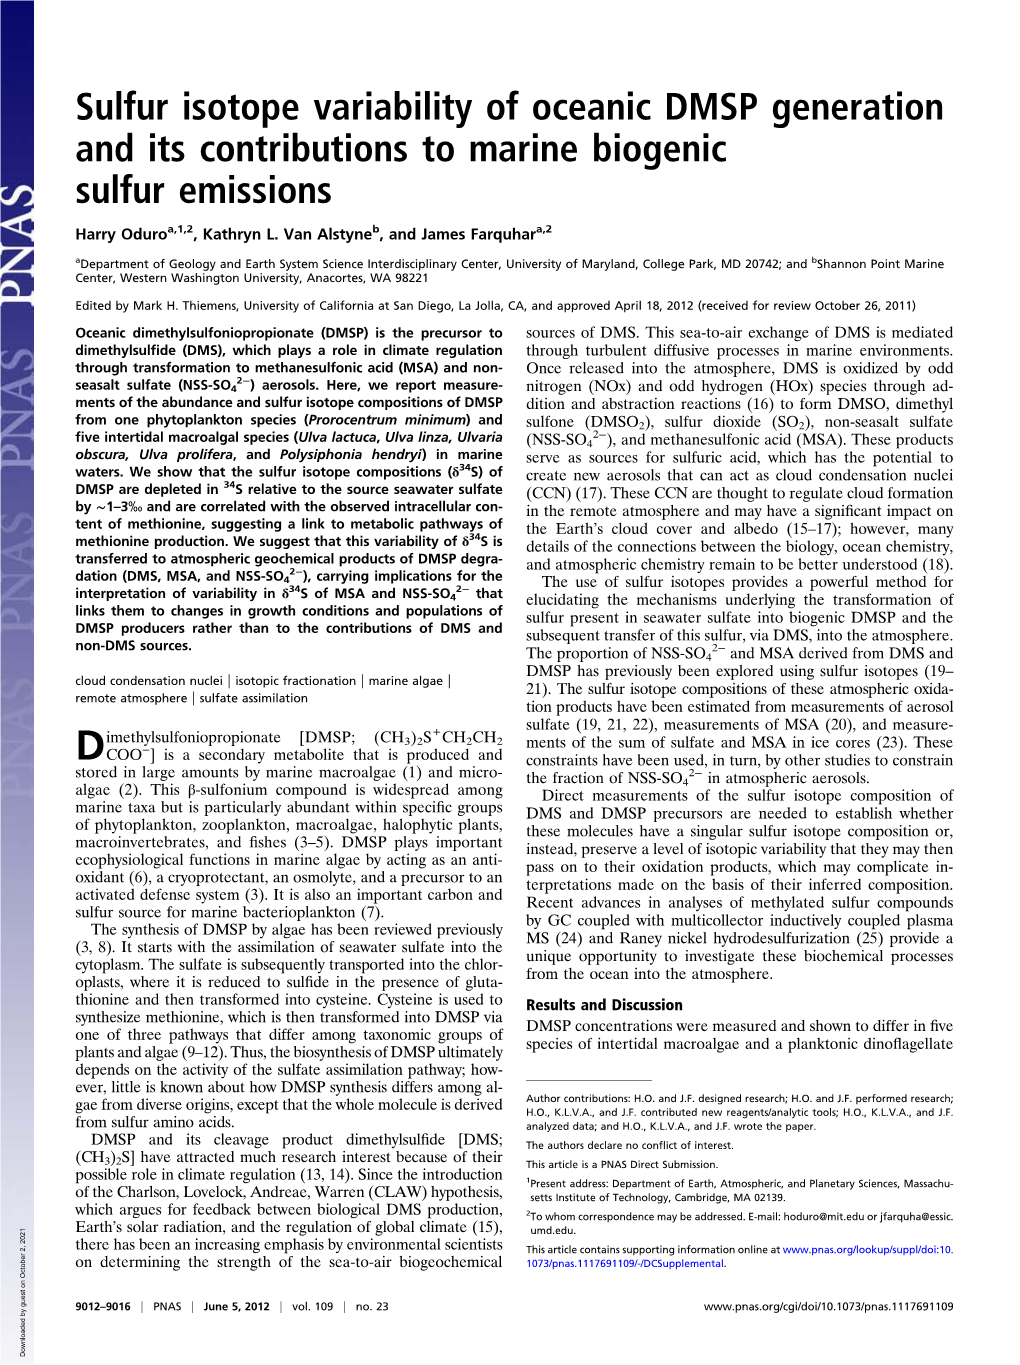 Sulfur Isotope Variability of Oceanic DMSP Generation and Its Contributions to Marine Biogenic Sulfur Emissions